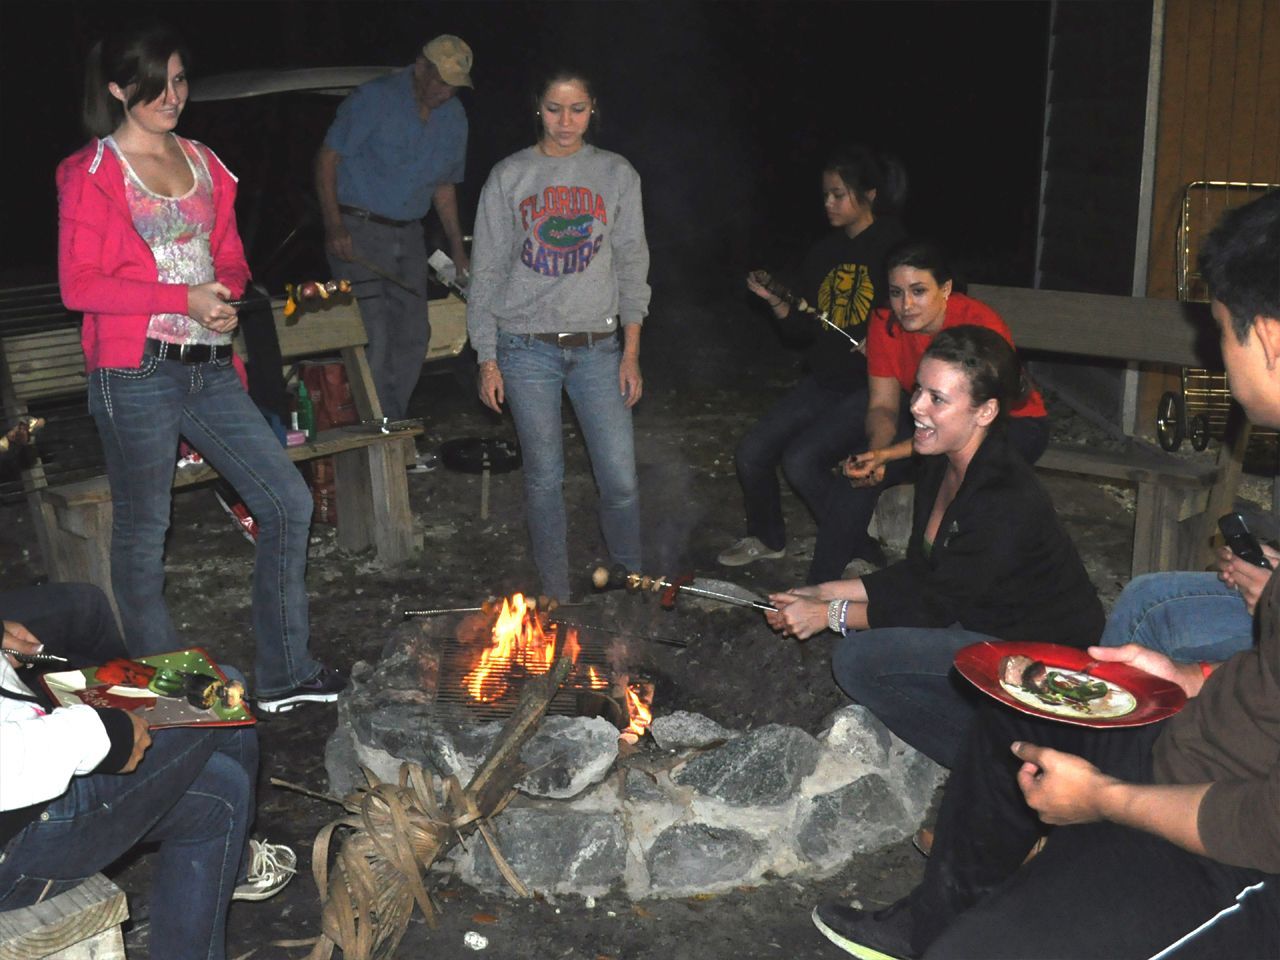 a group of people are gathered around a fire pit